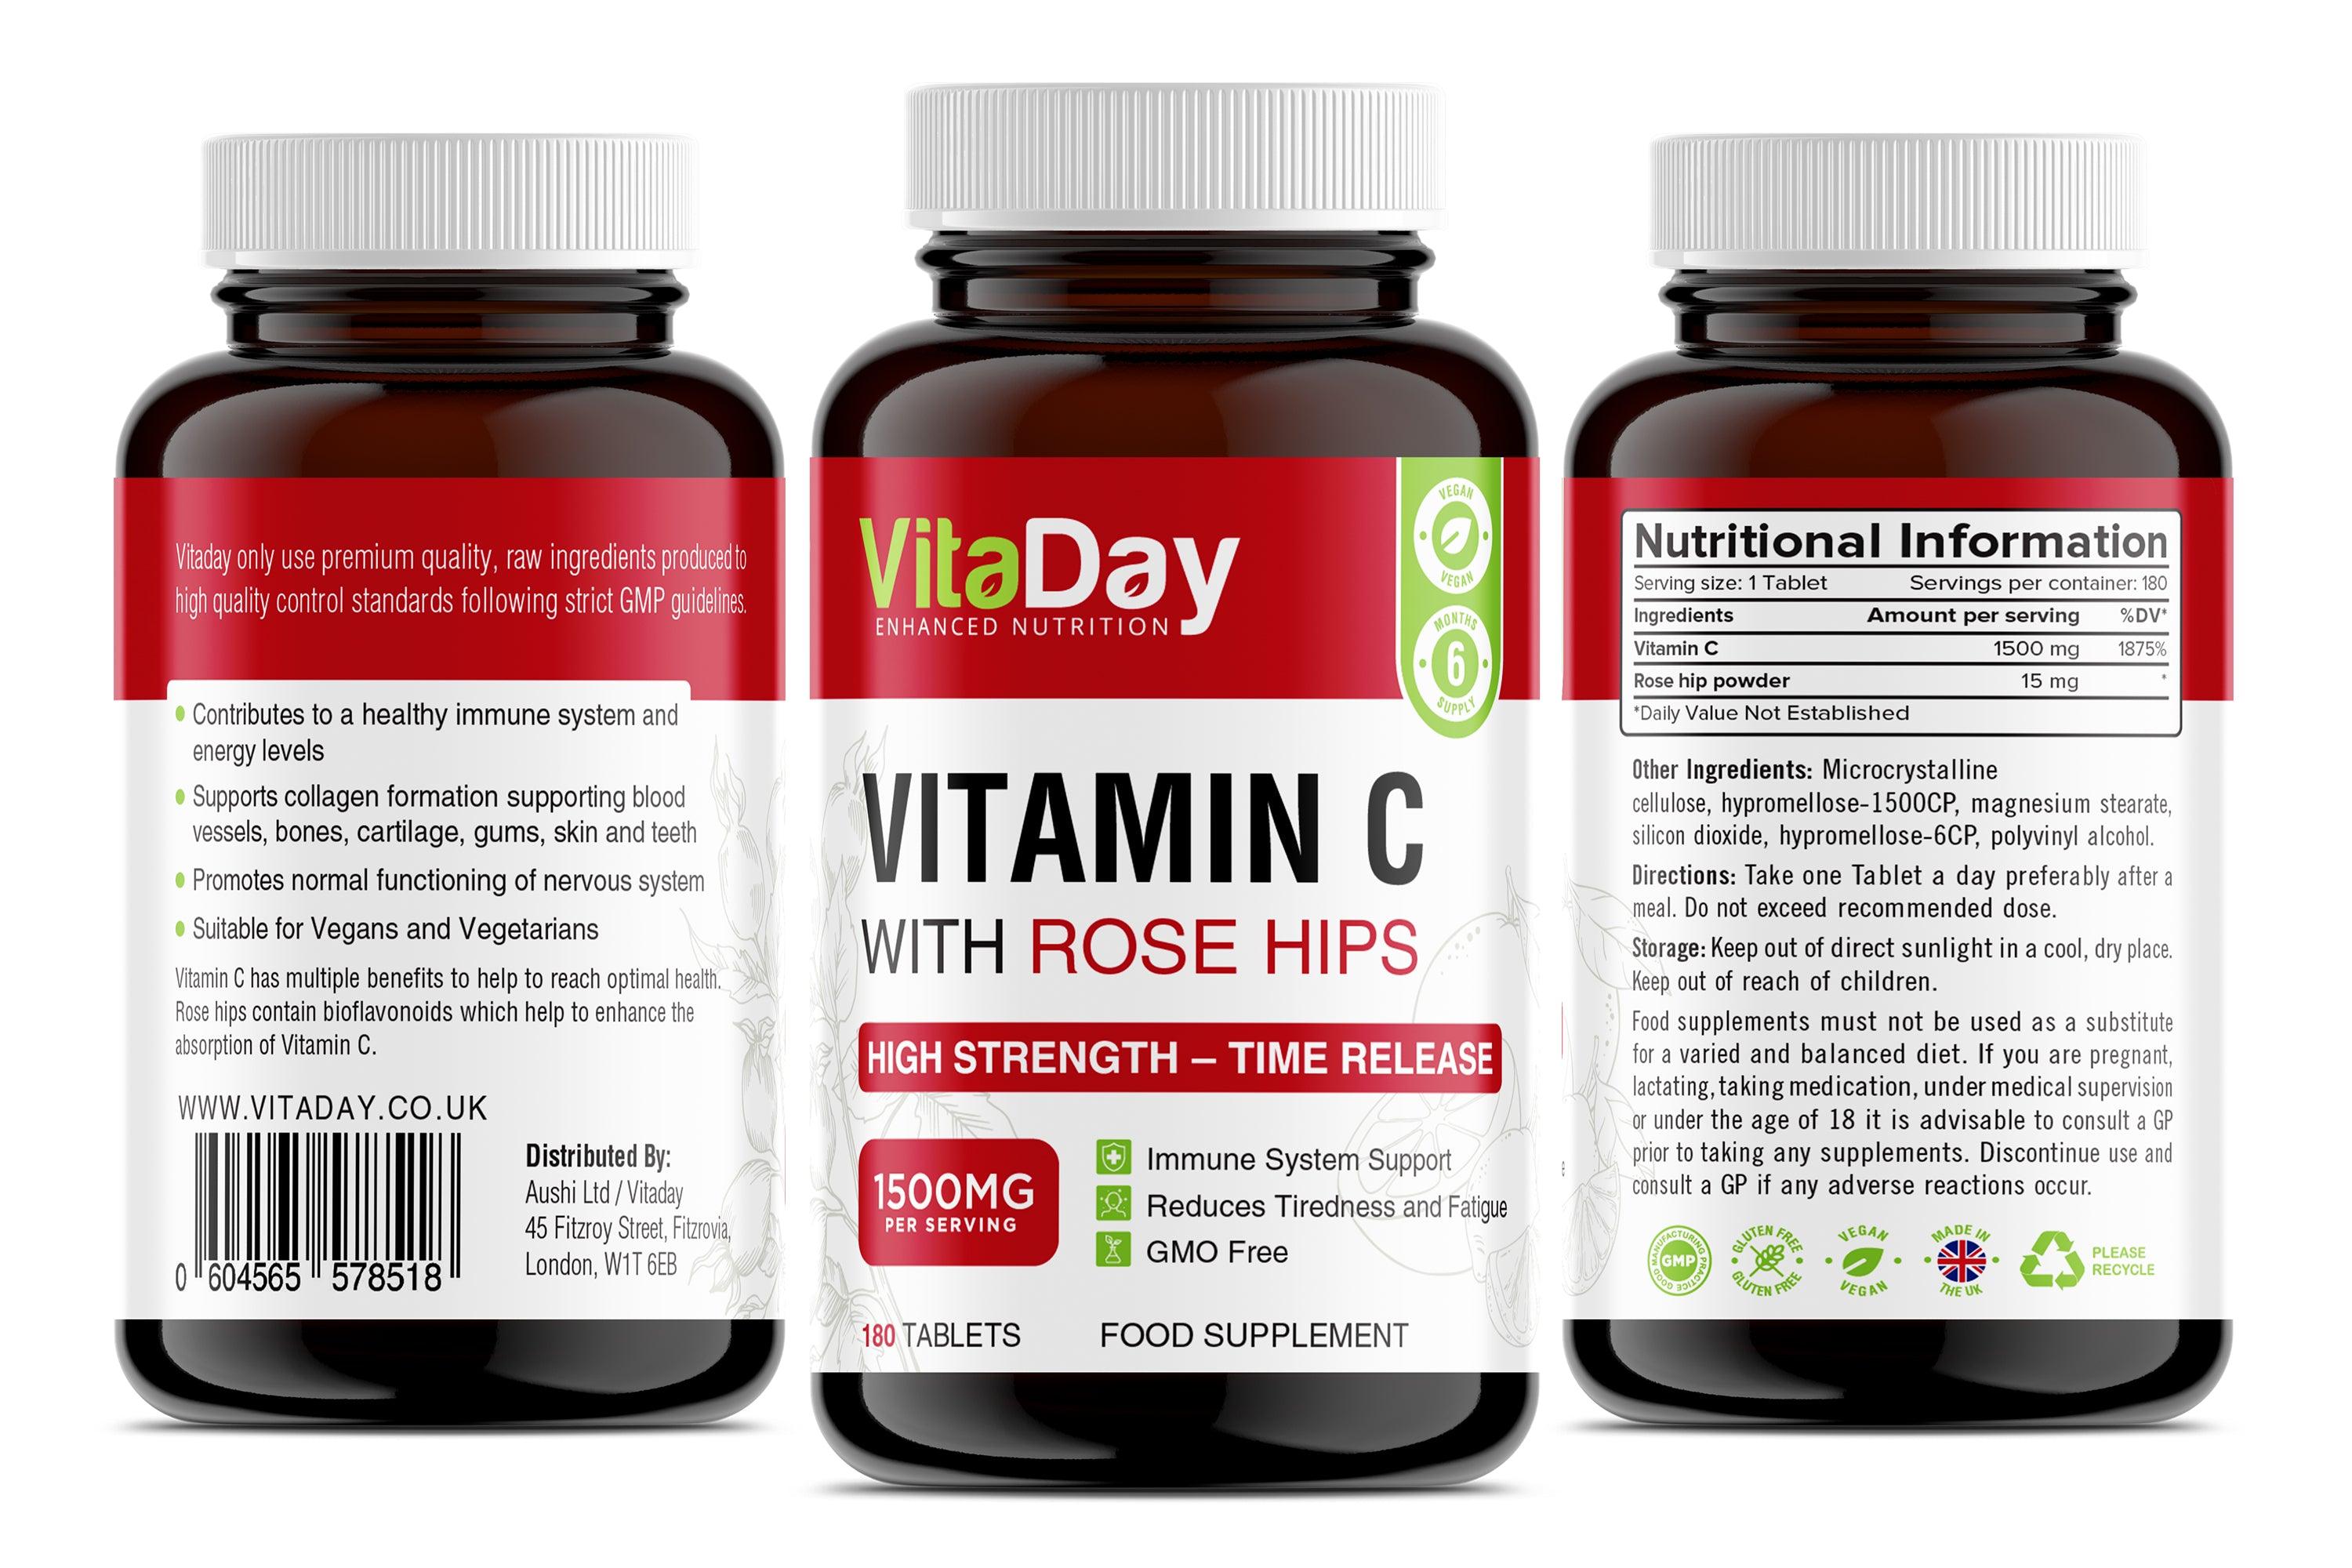 Vitamin C with Rose Hips - High Strength with Time Release - Vitaday